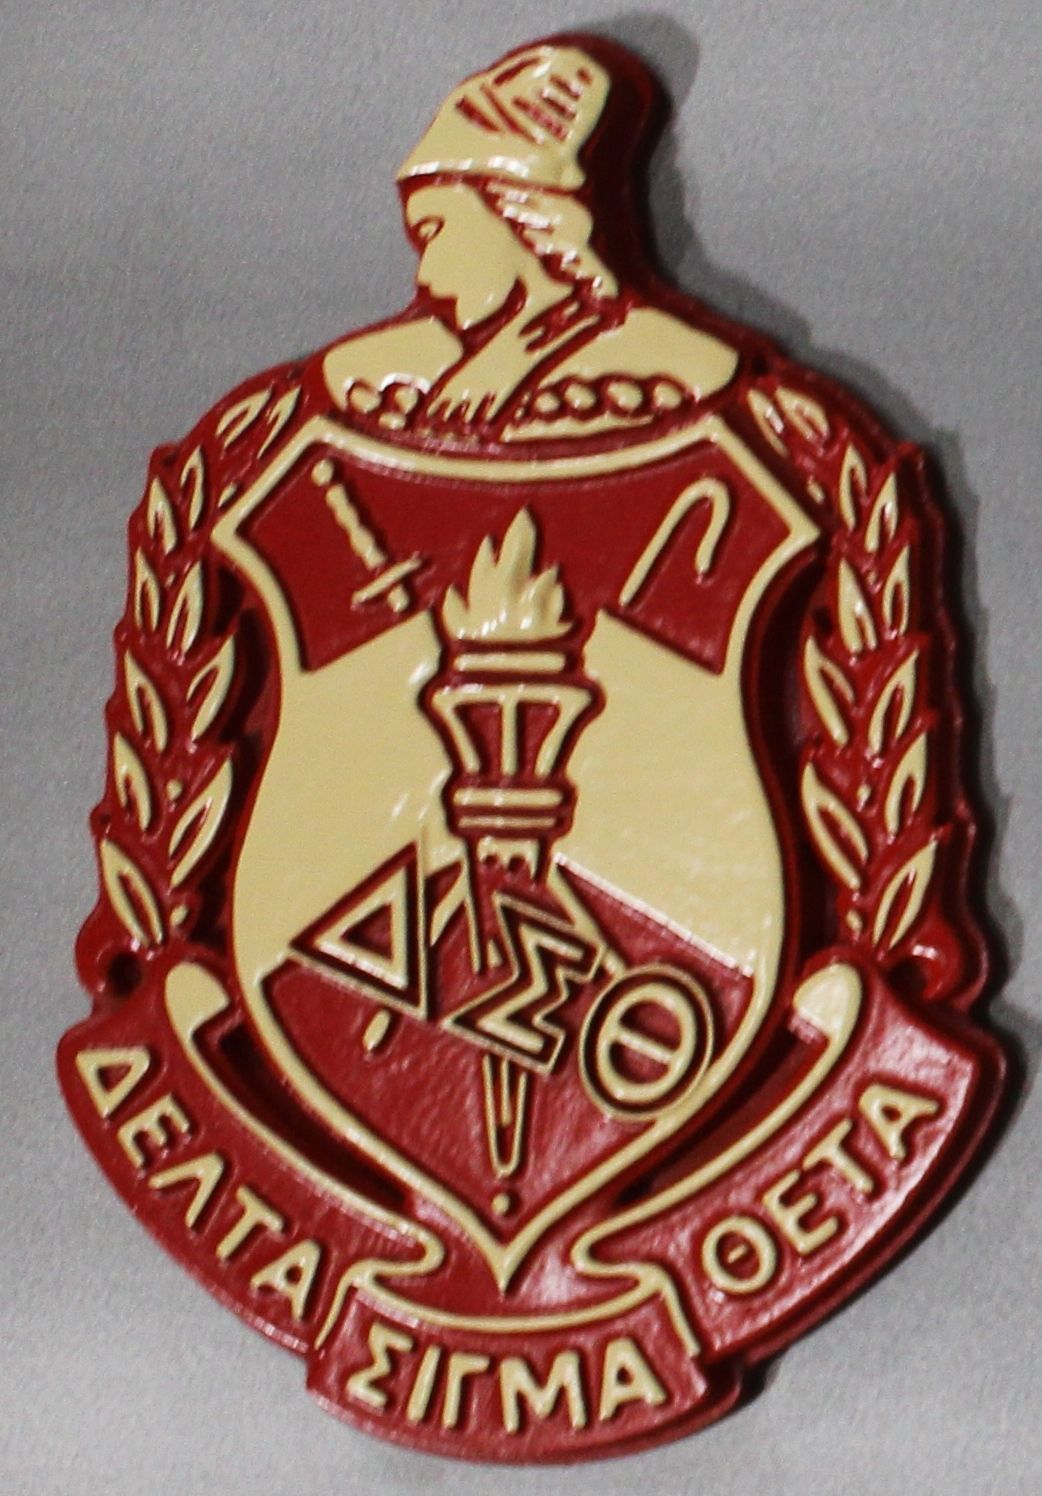 SP-1620 - Carved 2.5-D Raised Relief HDU Plaque of the Coat-of-Arms of the Delta Sigma Theta Sorority